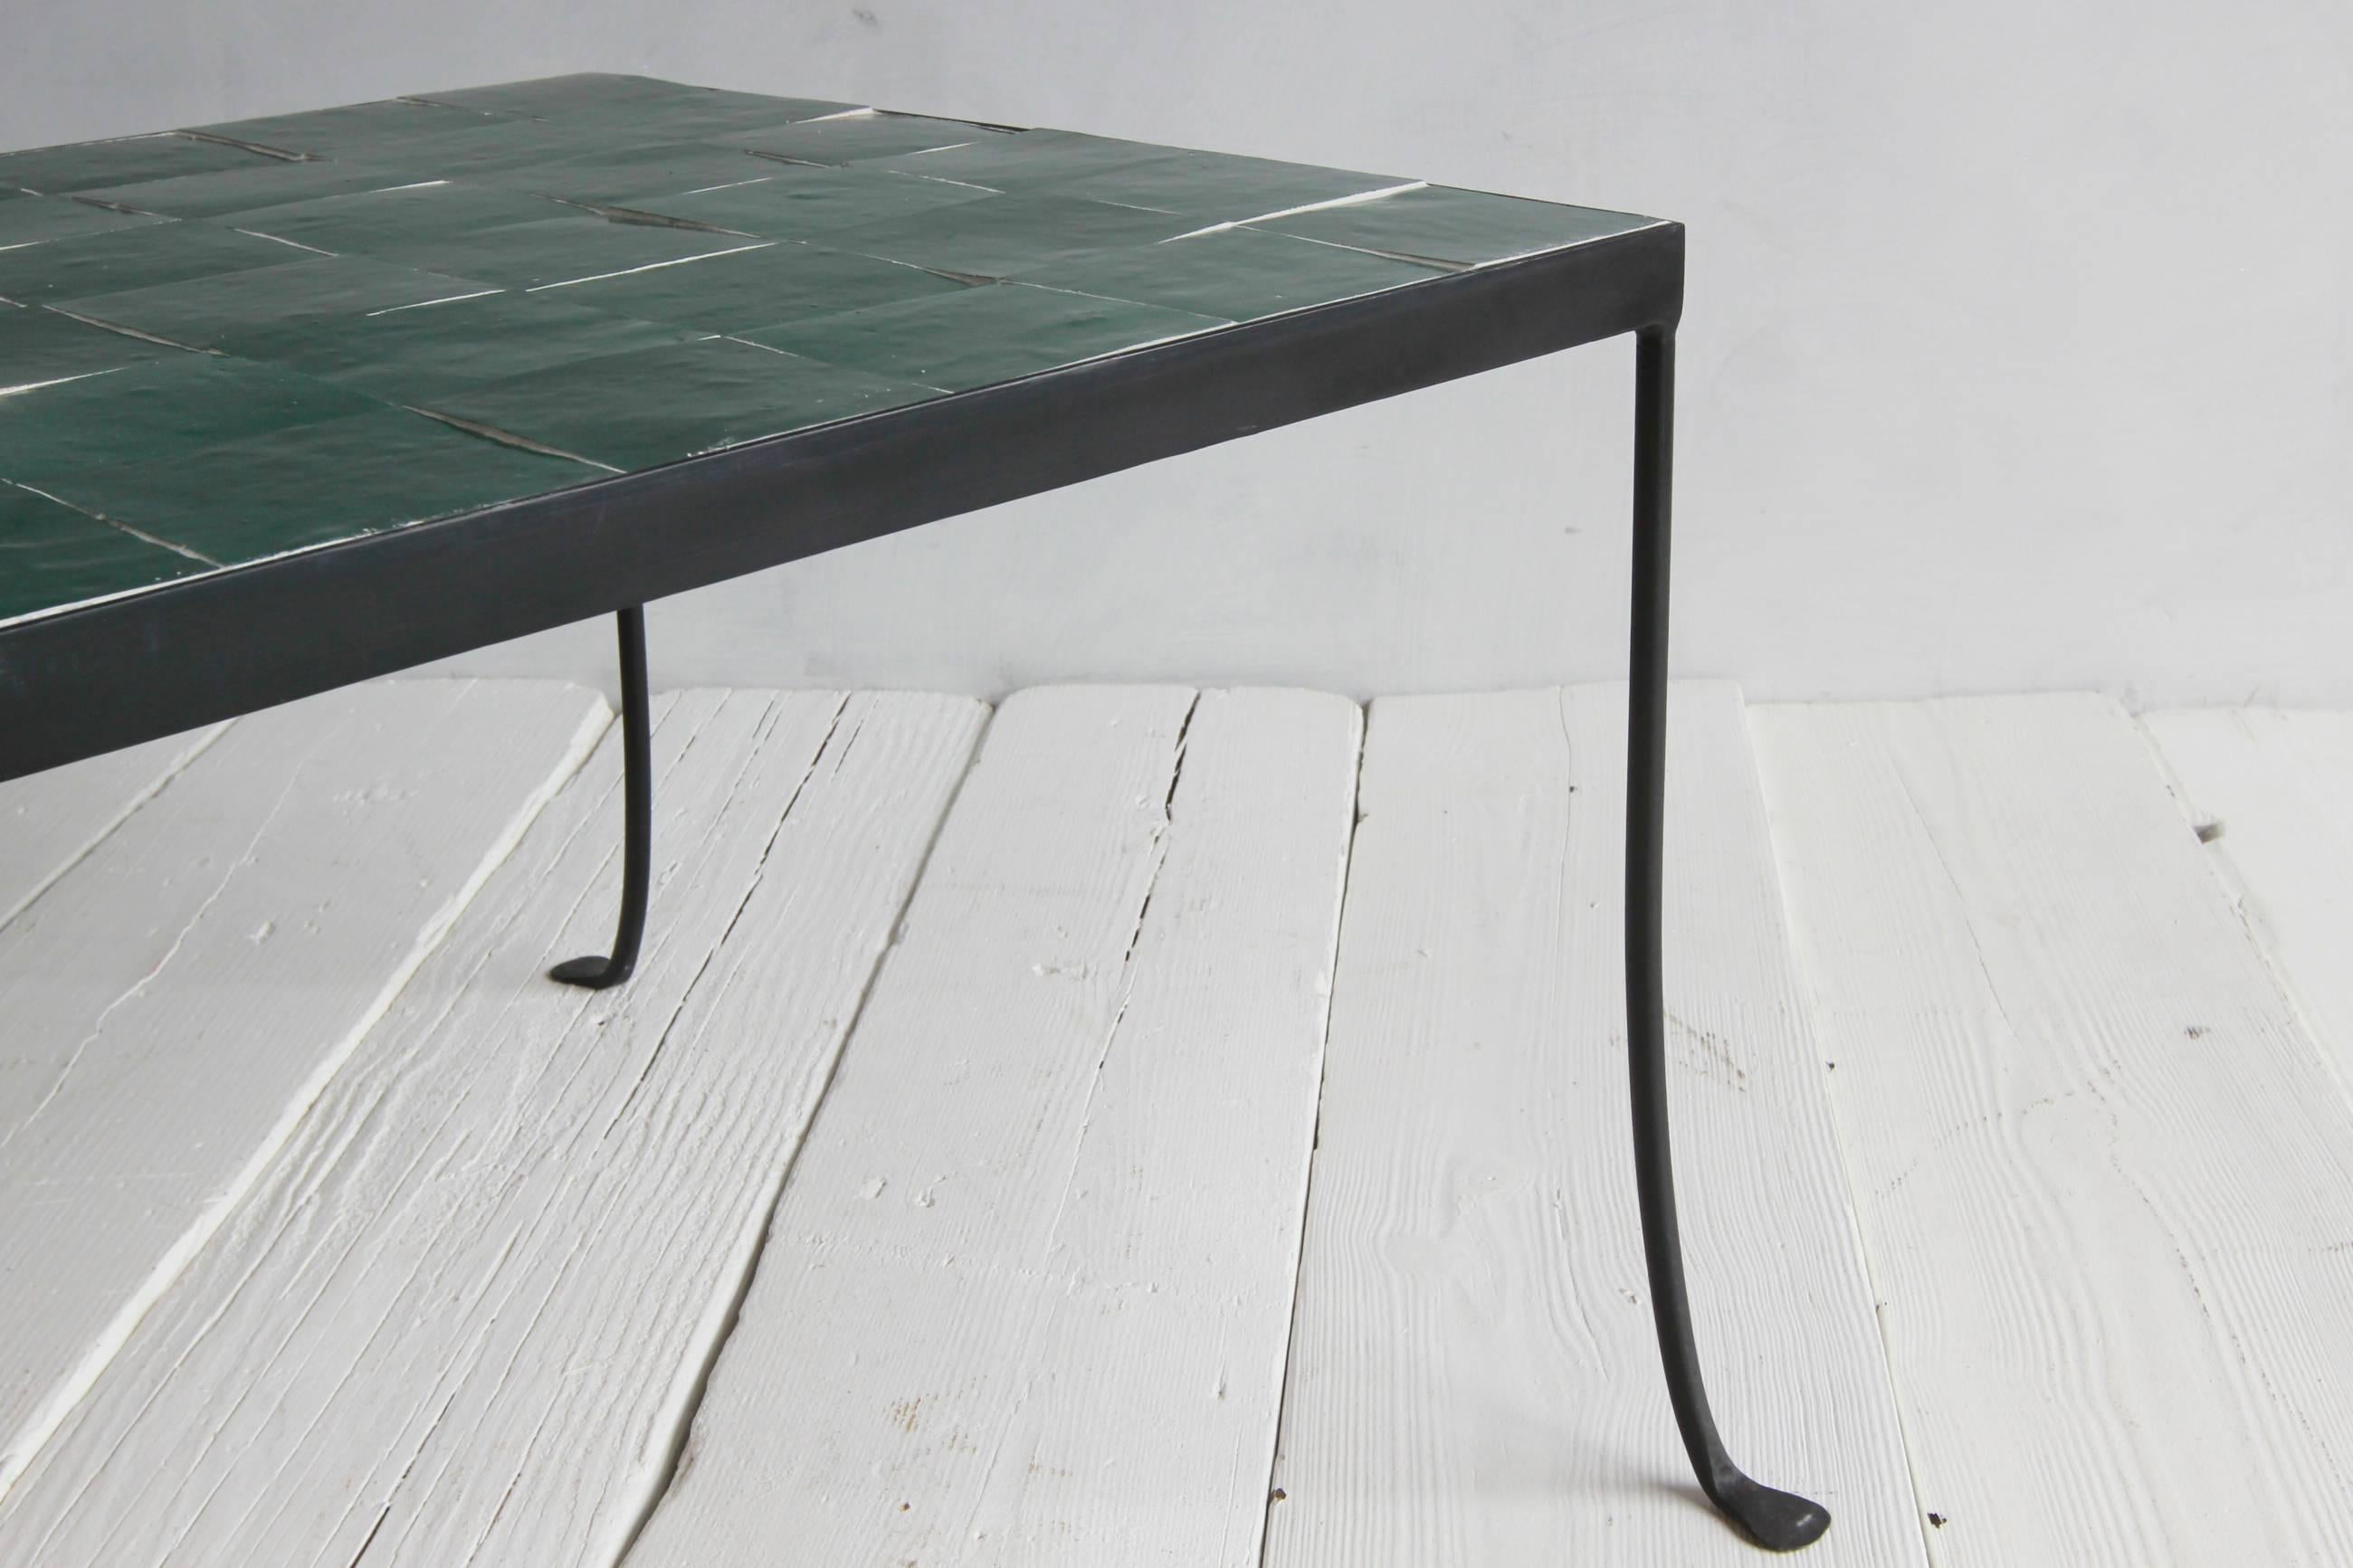 NK collection outdoor wrought iron tiled side table in emerald

Also available in putty, bone, and saffron.